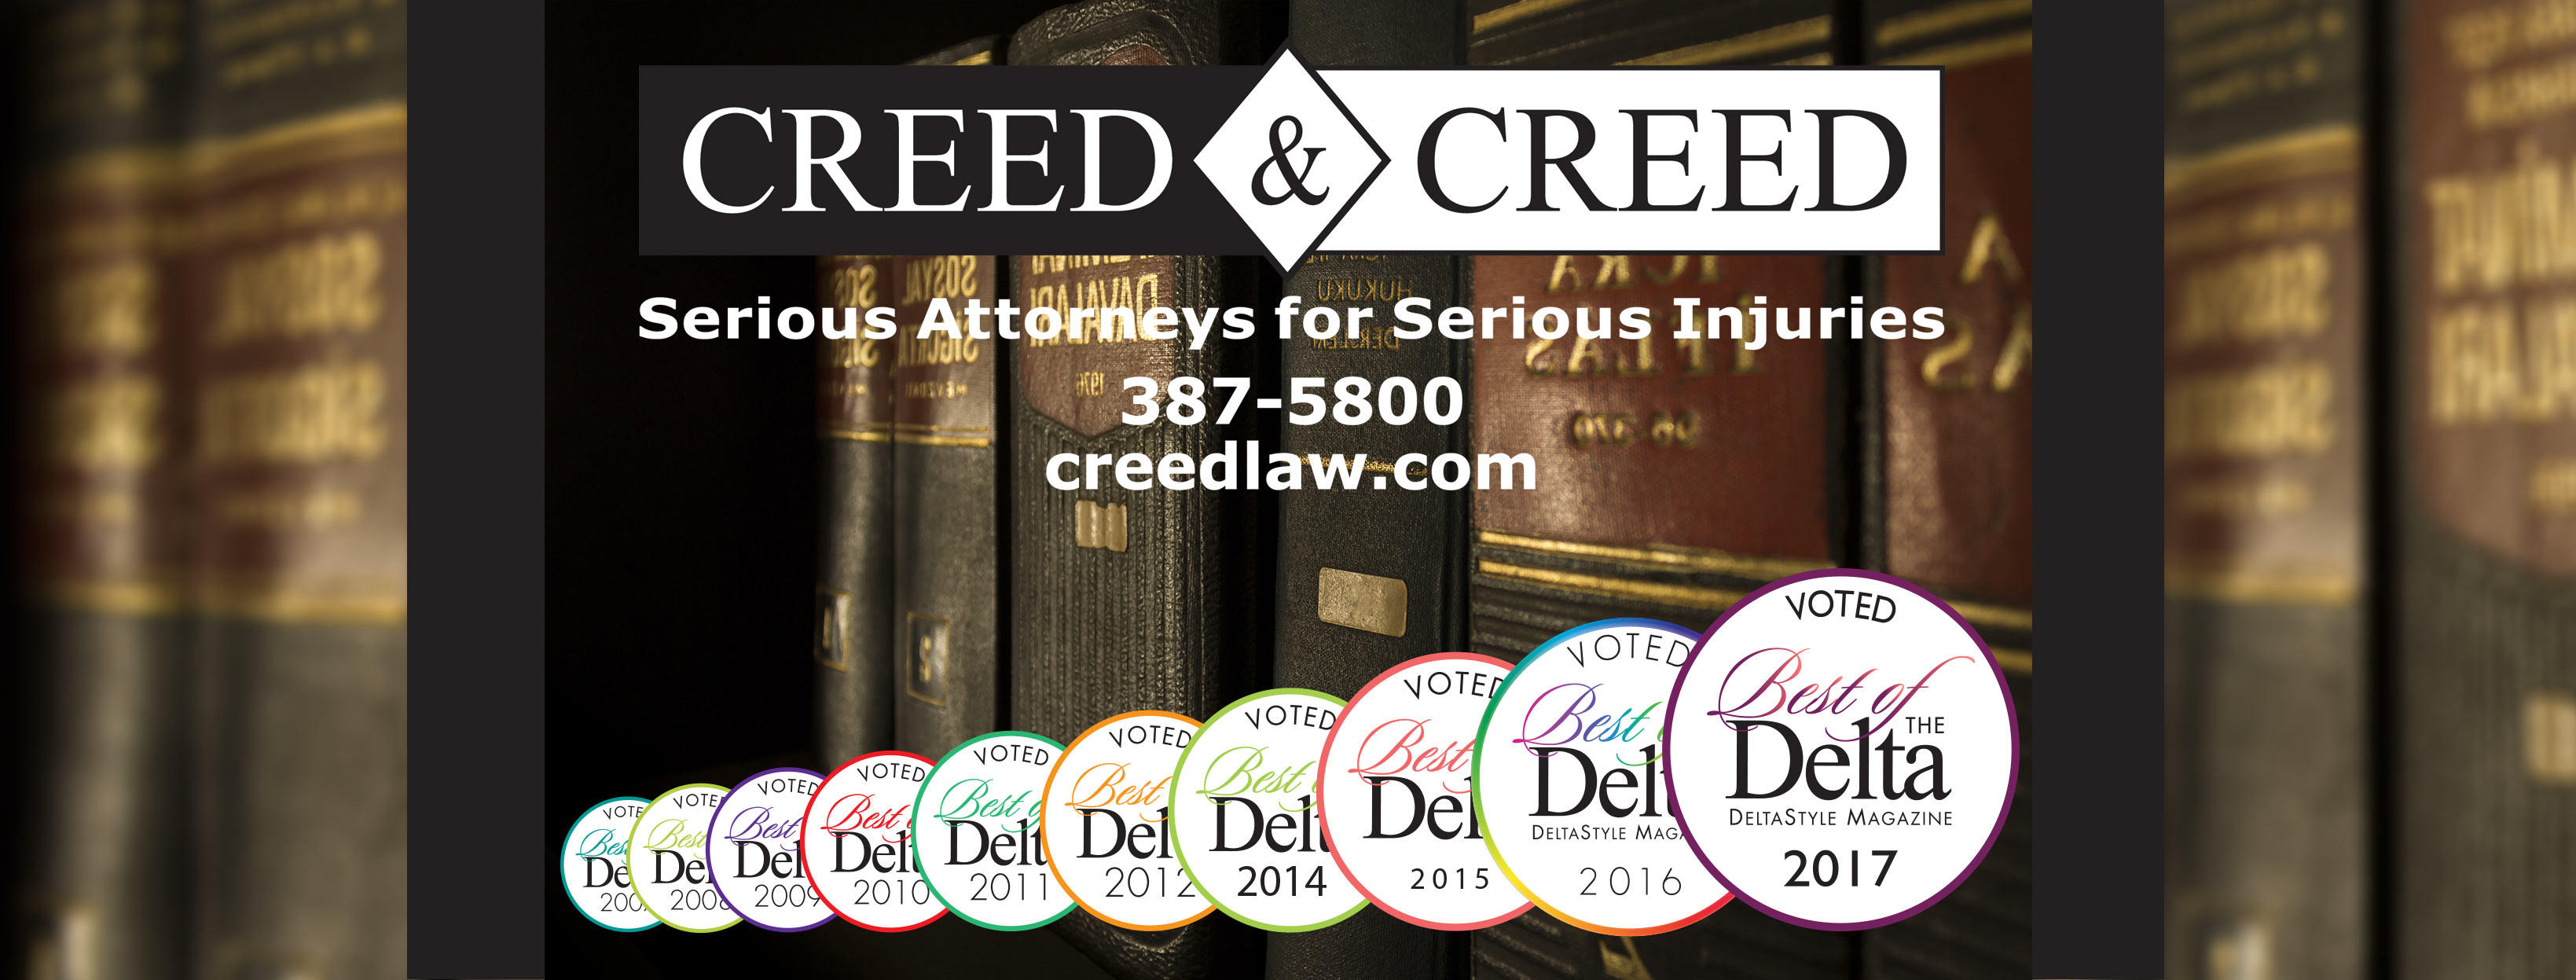 Creed & Creed Law Offices Photo